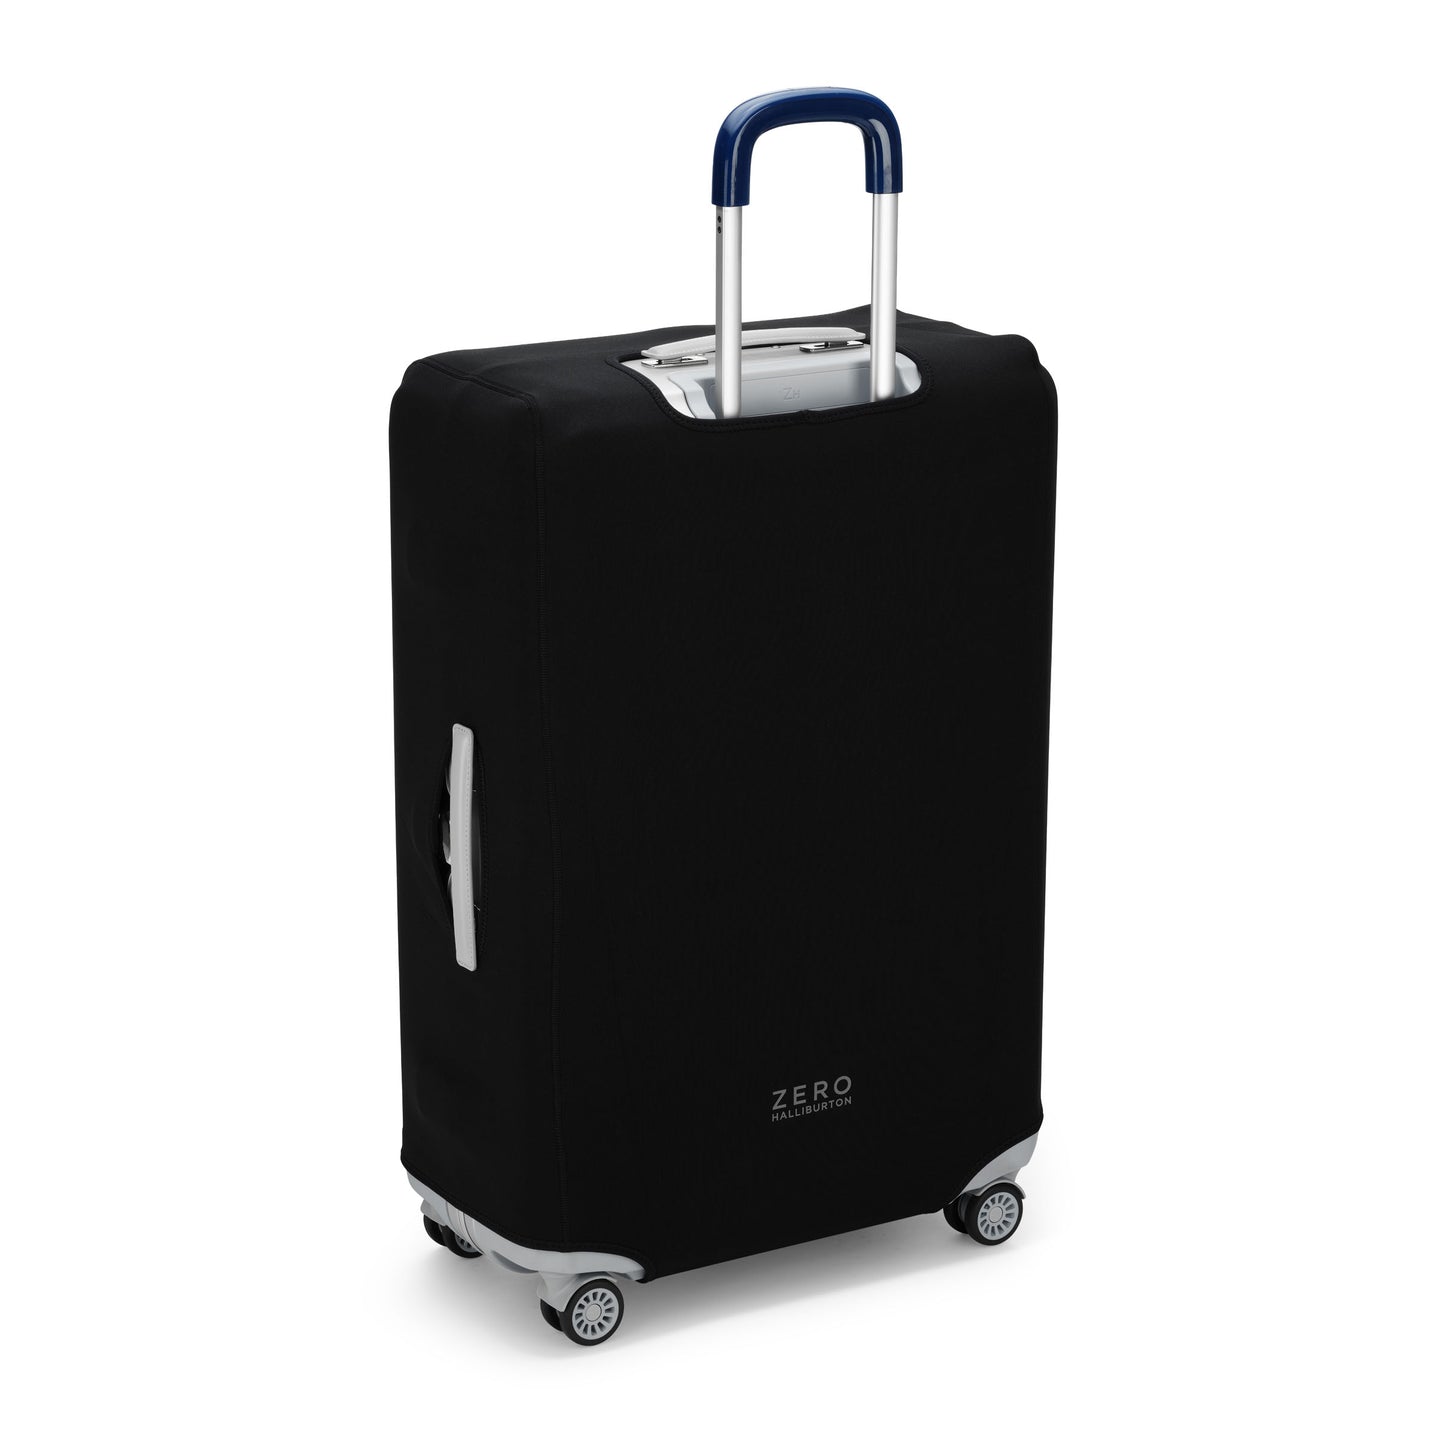 Accessories | Gen ZH Luggage Cover 30"